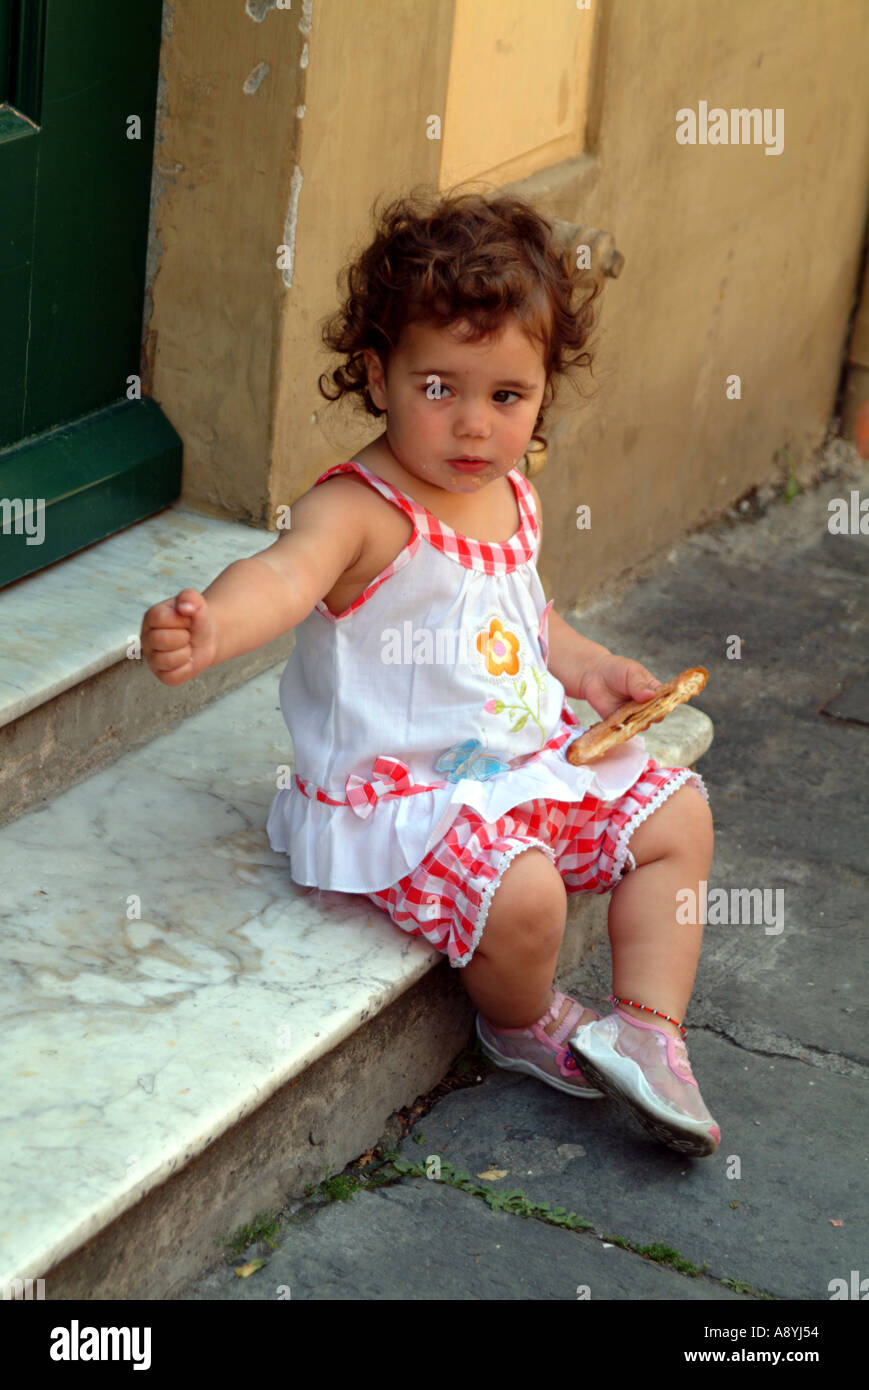 Little Italian girl eating pizza sitting on step in a Pisa street Tuscany Italy EU Stock Photo